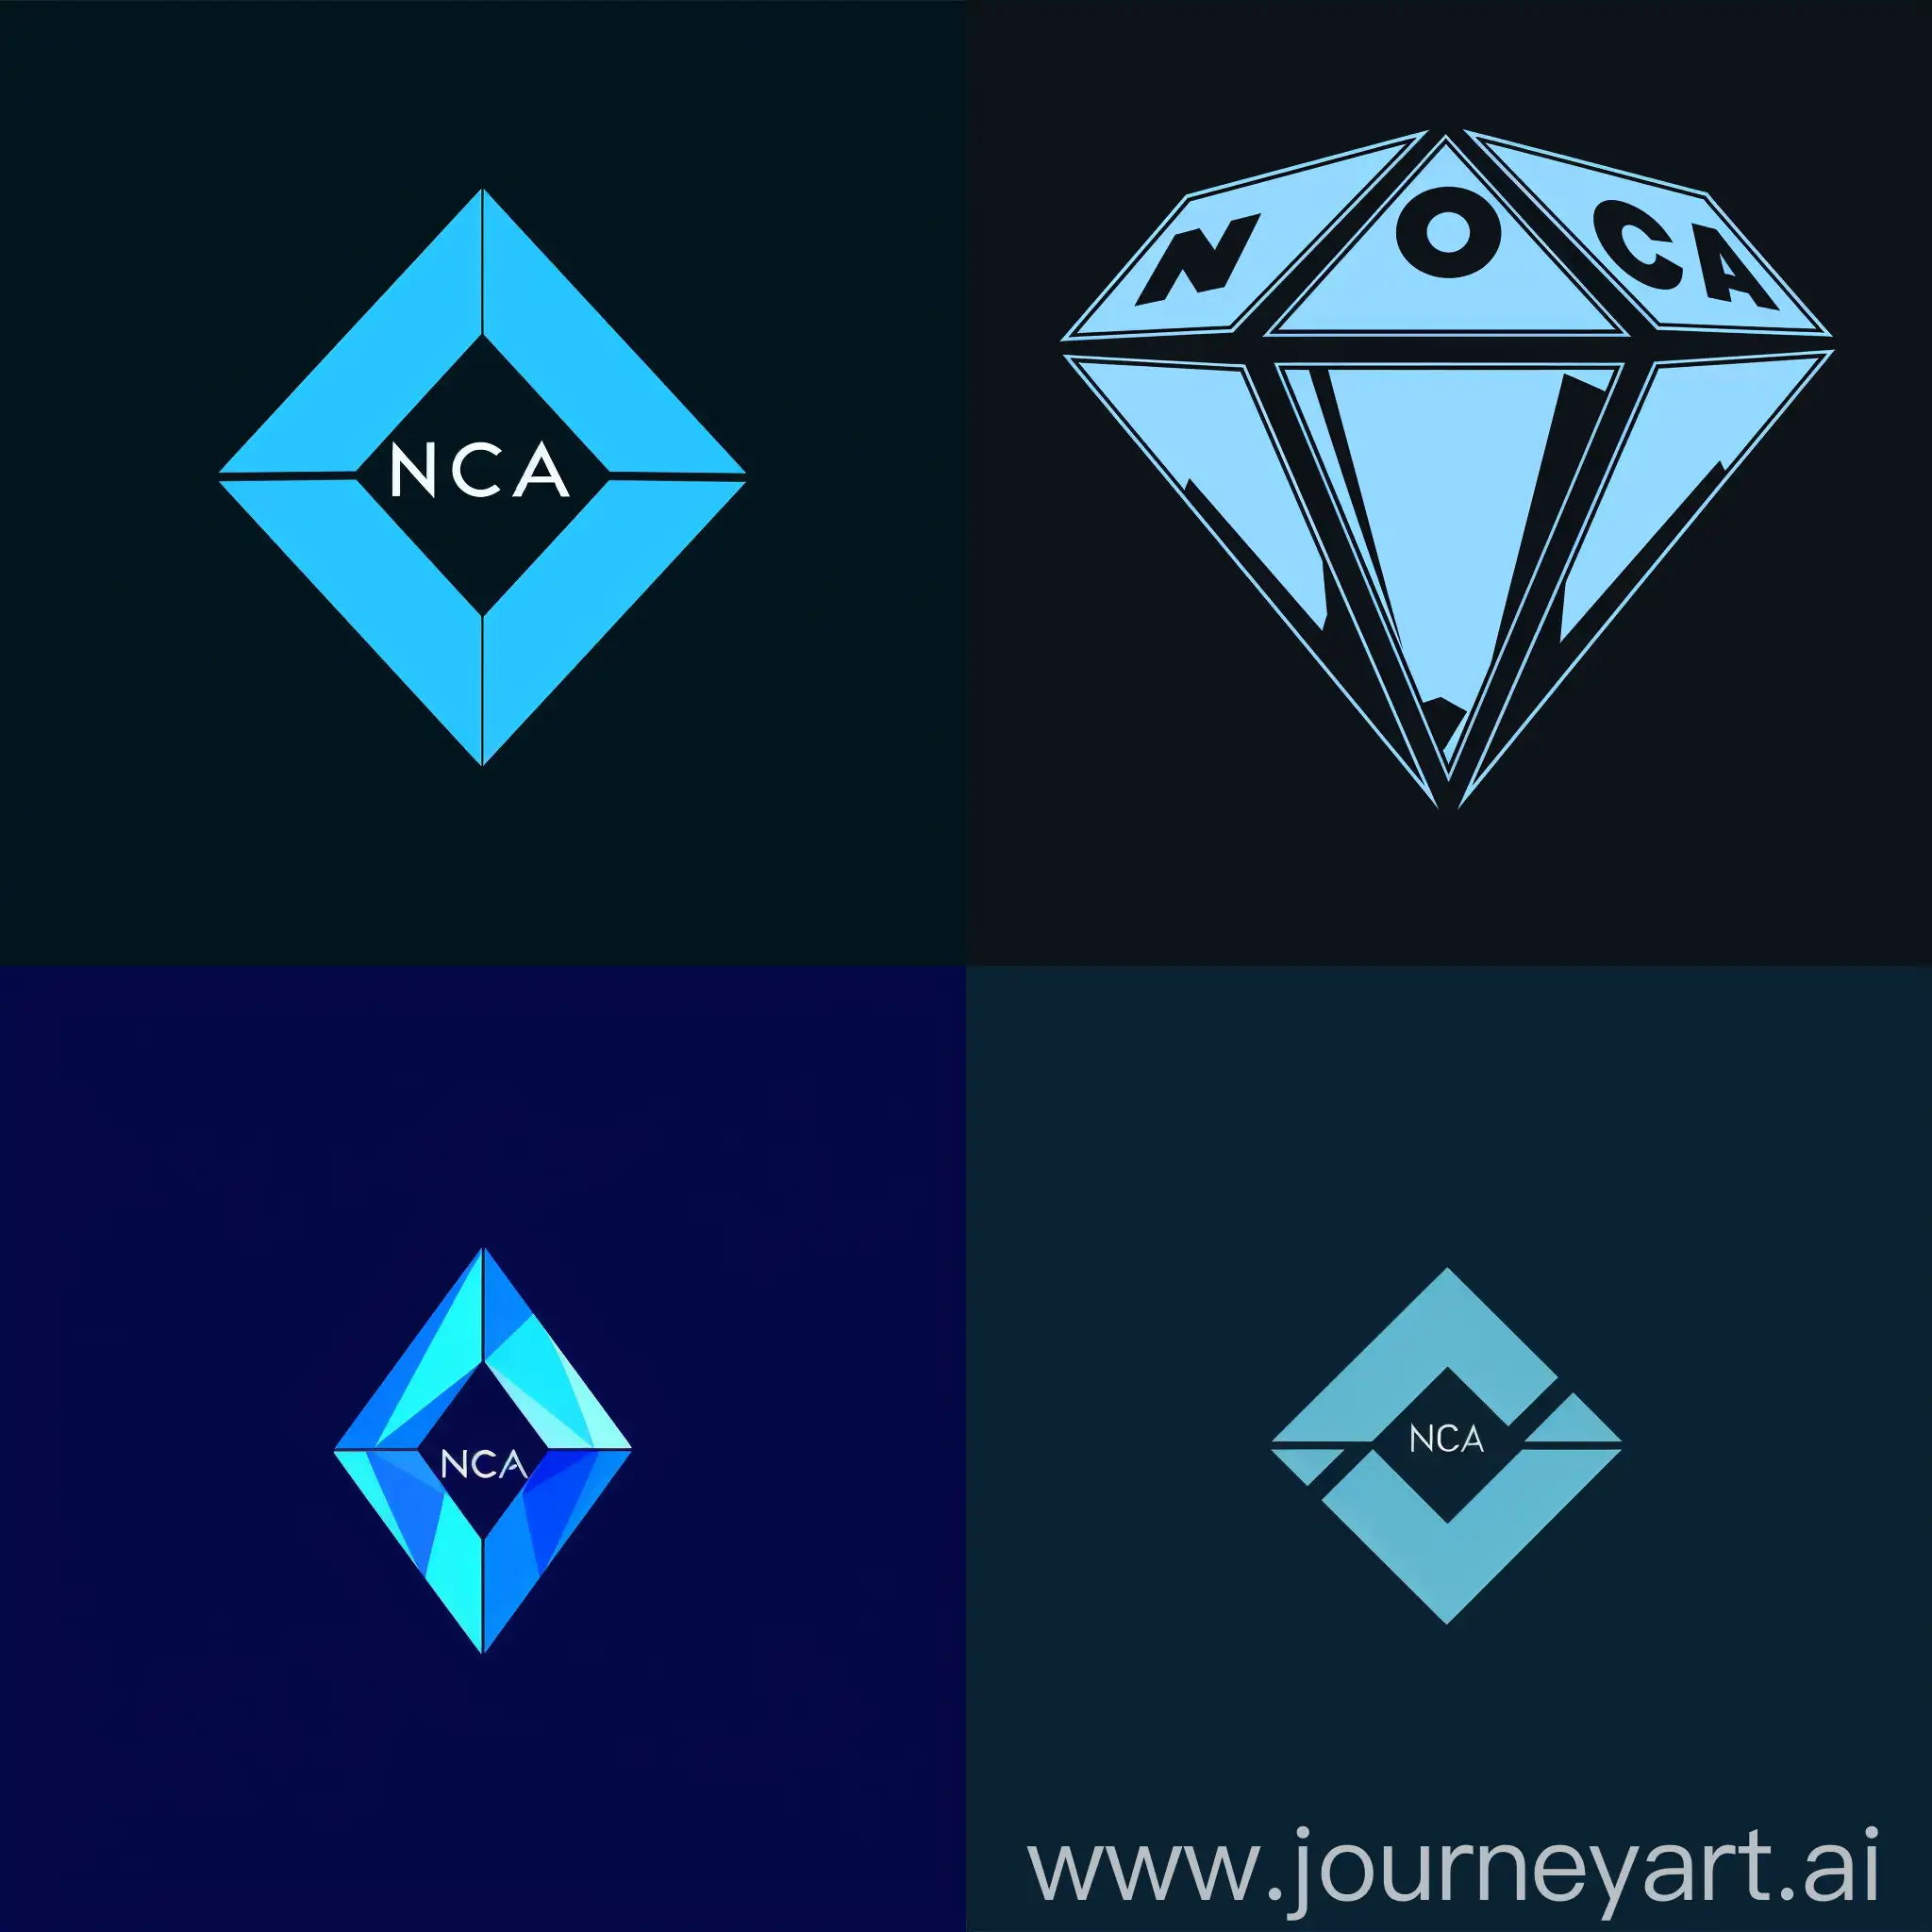  "Create a text-based, minimalist diamond-inspired logo using the color blue. The logo should be in plain text format. Here is an example of a minimalist text-based logo: 'NOCA". Can you generate a logo like this but inspired by a diamond shape and in the color blue?"